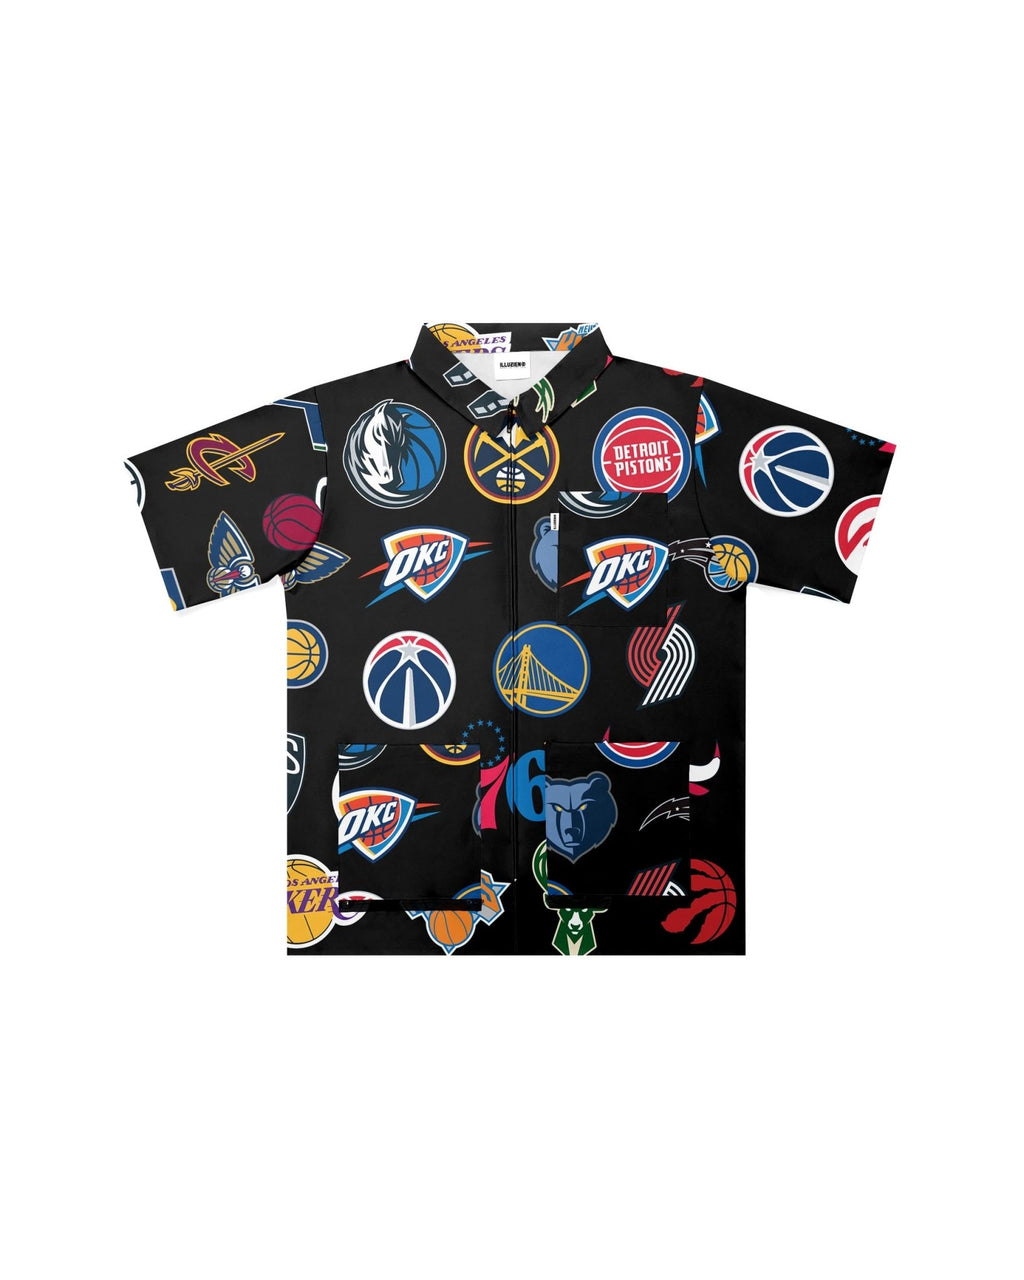 New Orleans Hornets NBA Jackets for sale